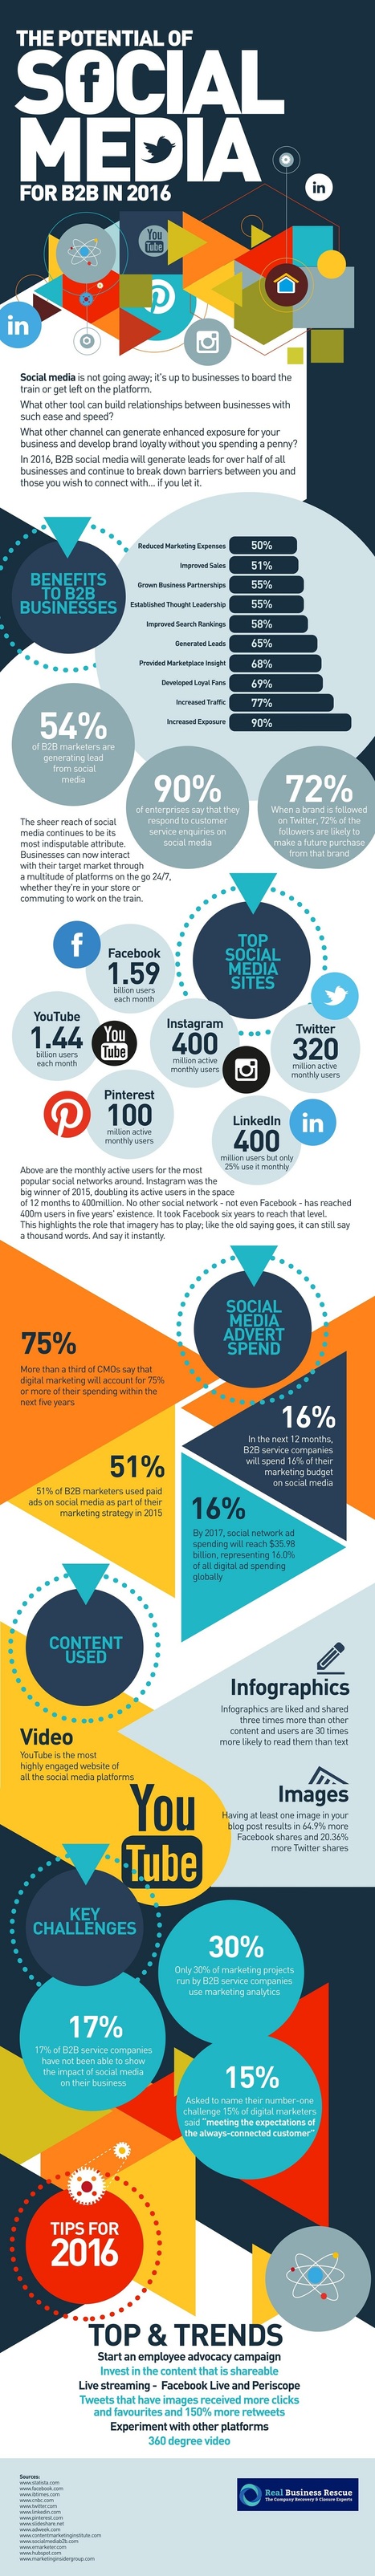 The Potential of Social Media for B2B in 2016 #Infographic | social media useful  tools | Scoop.it